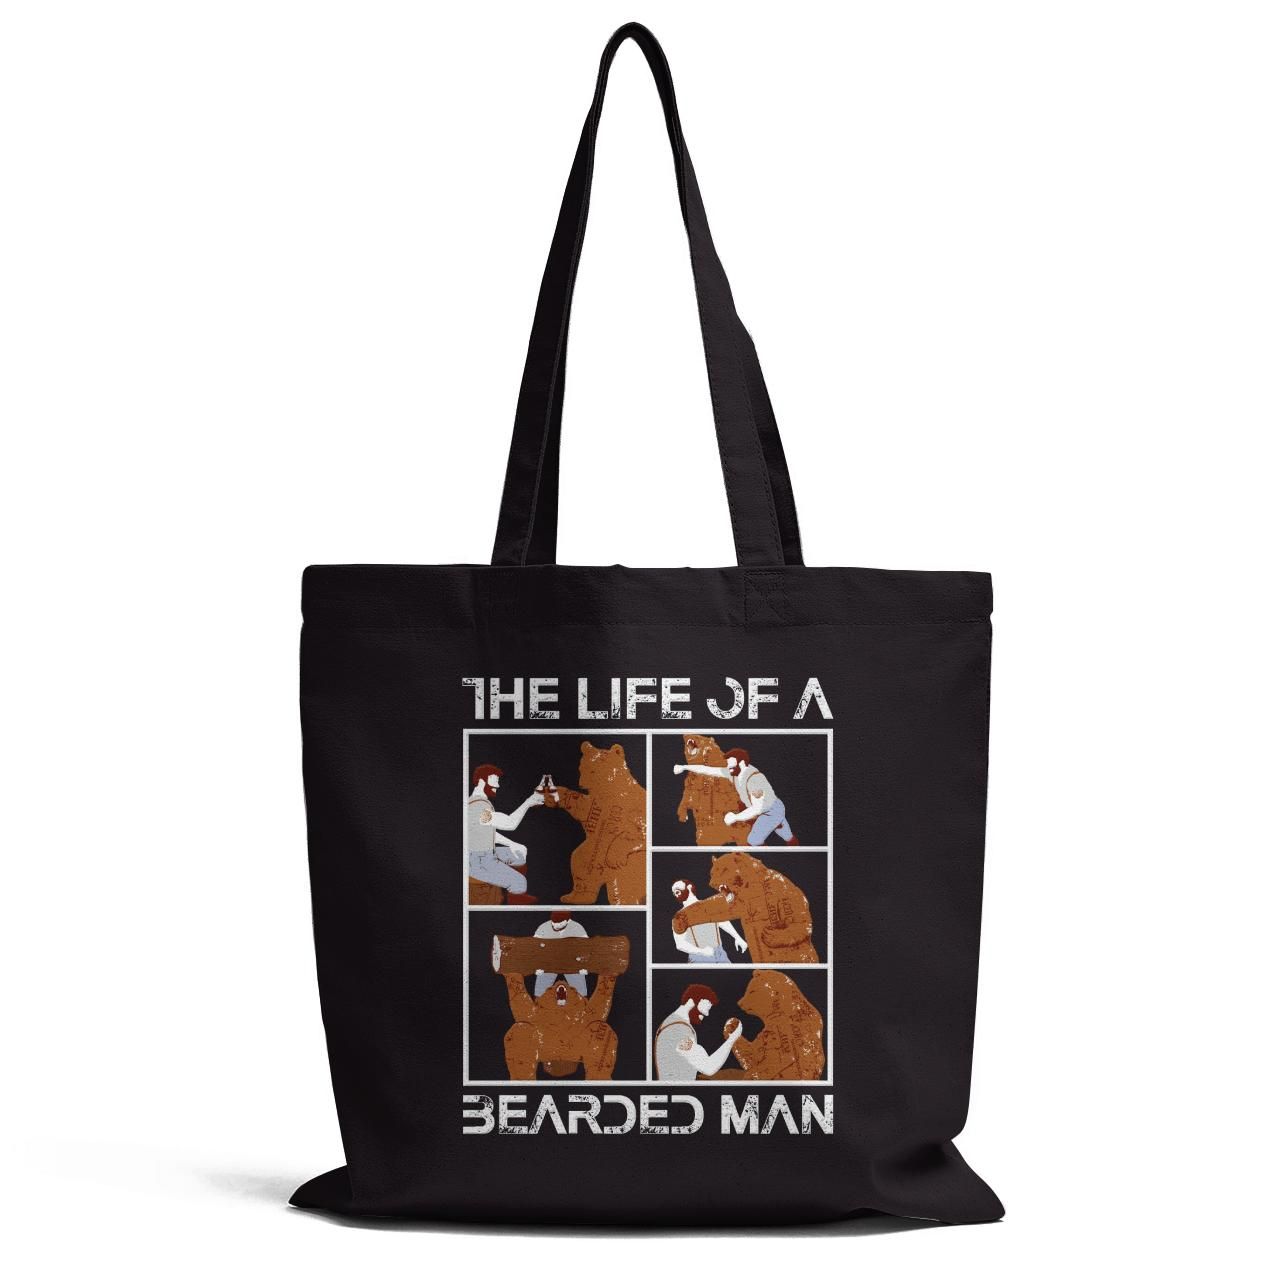 The Life Of A Bearded Man Tote Bag